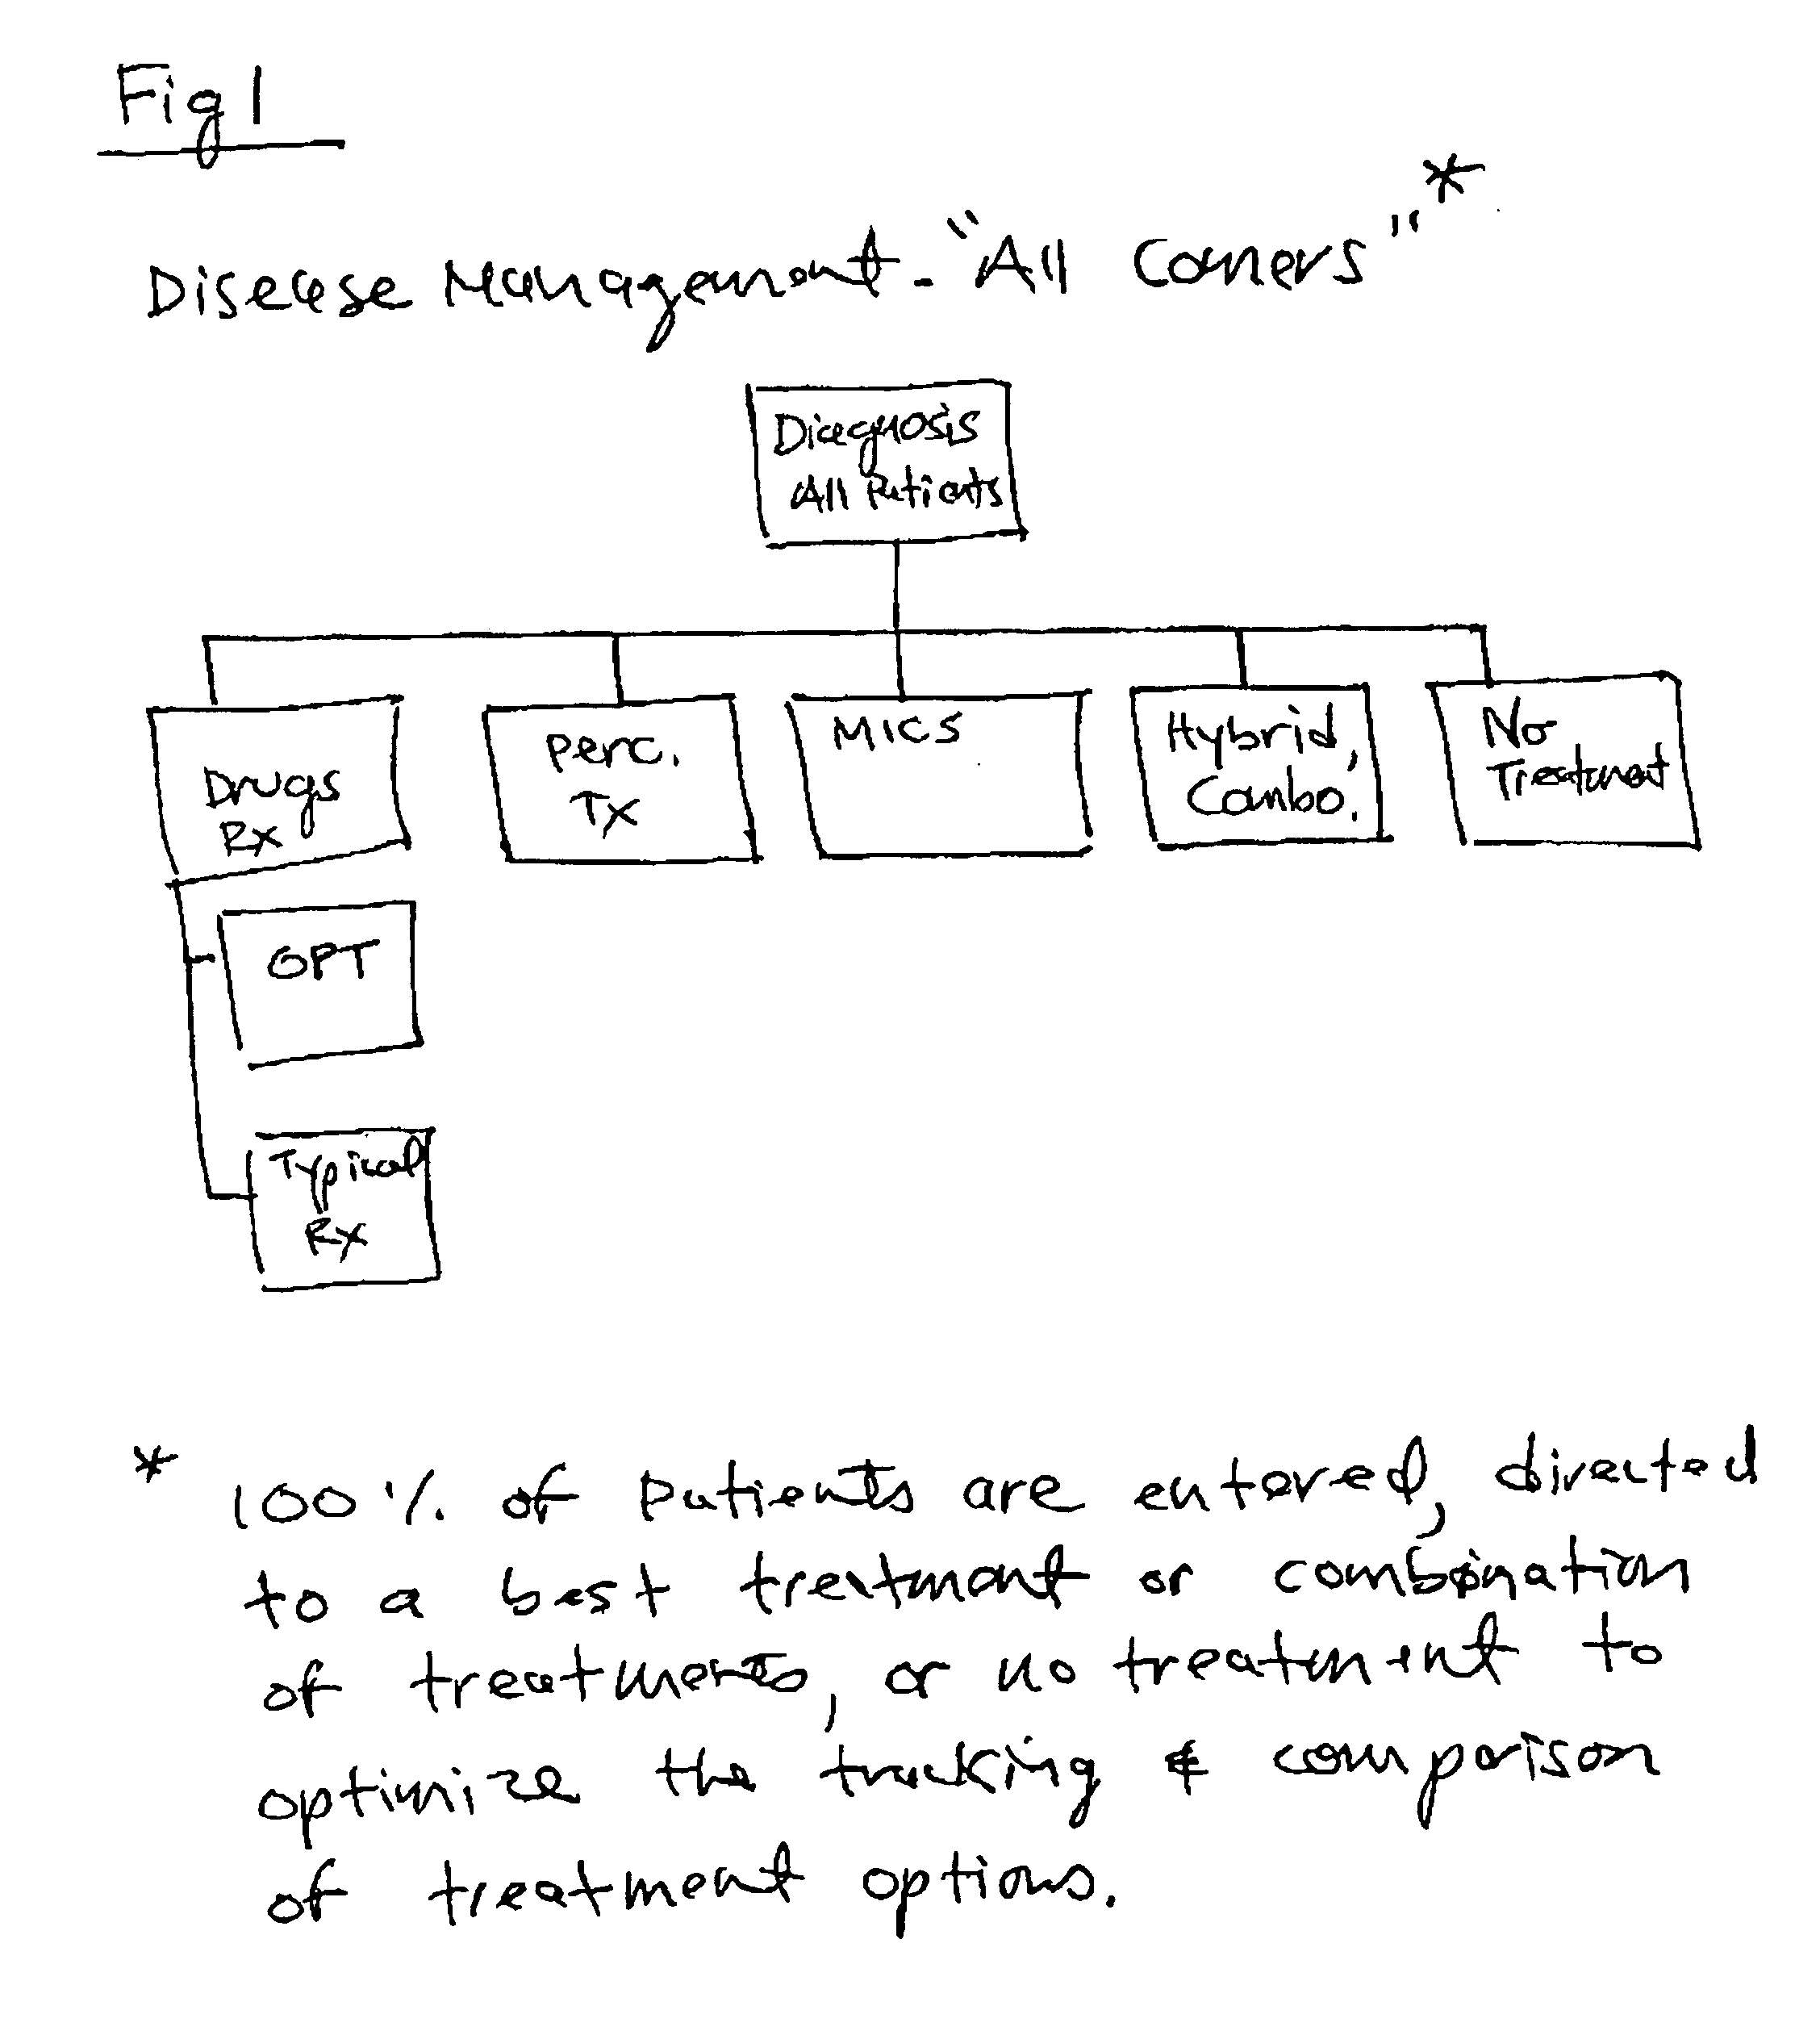 Systems and methods for disease management